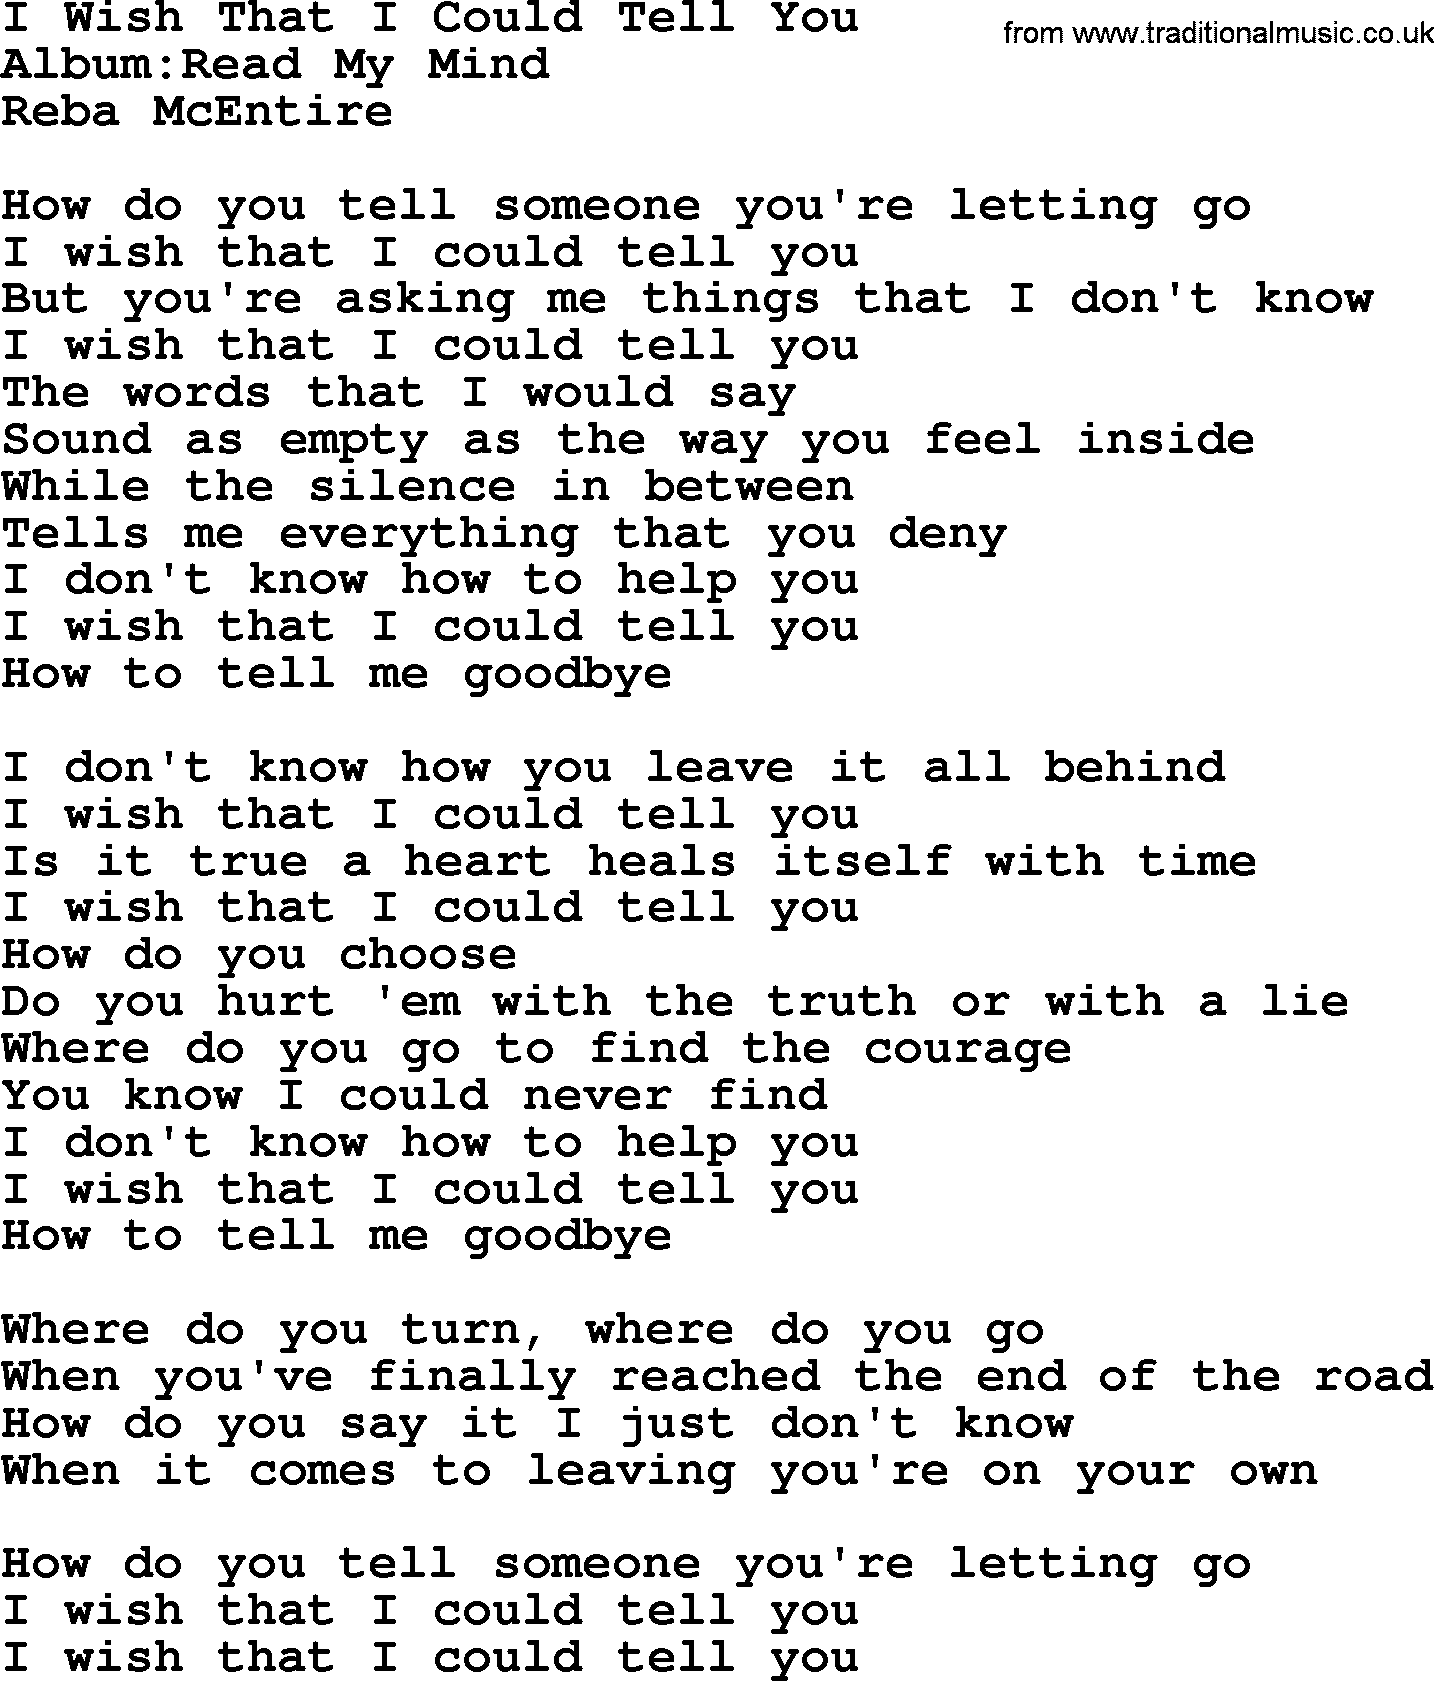 Reba McEntire song: I Wish That I Could Tell You lyrics